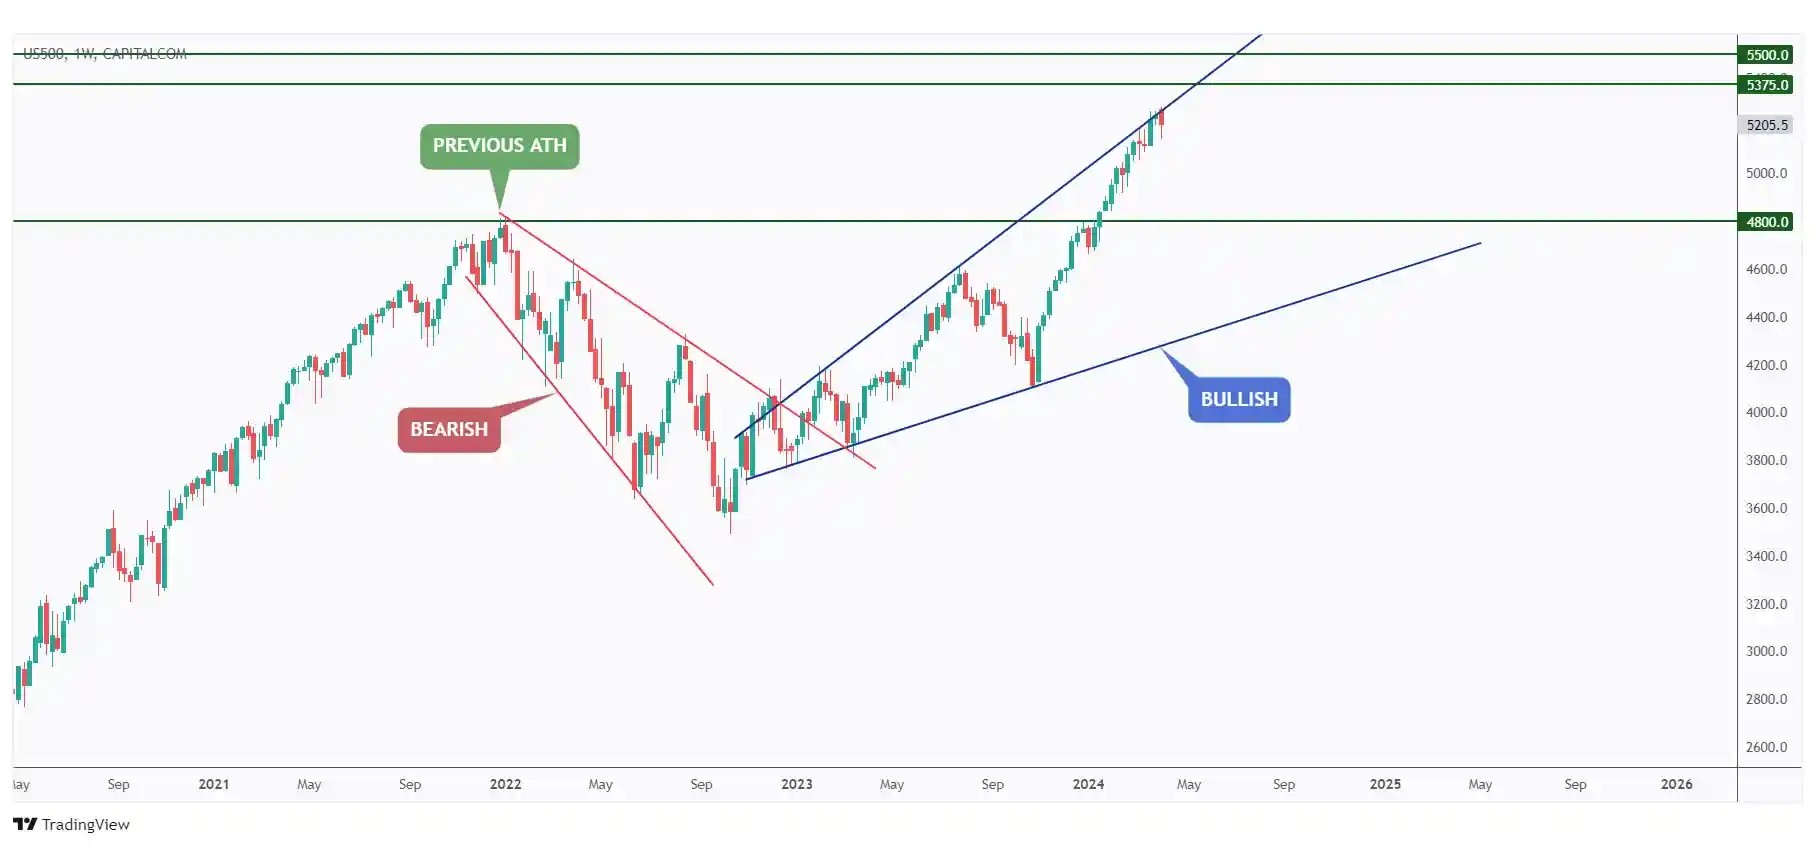 US500 weekly chart still hovering around the upper bound of the wedge pattern. 